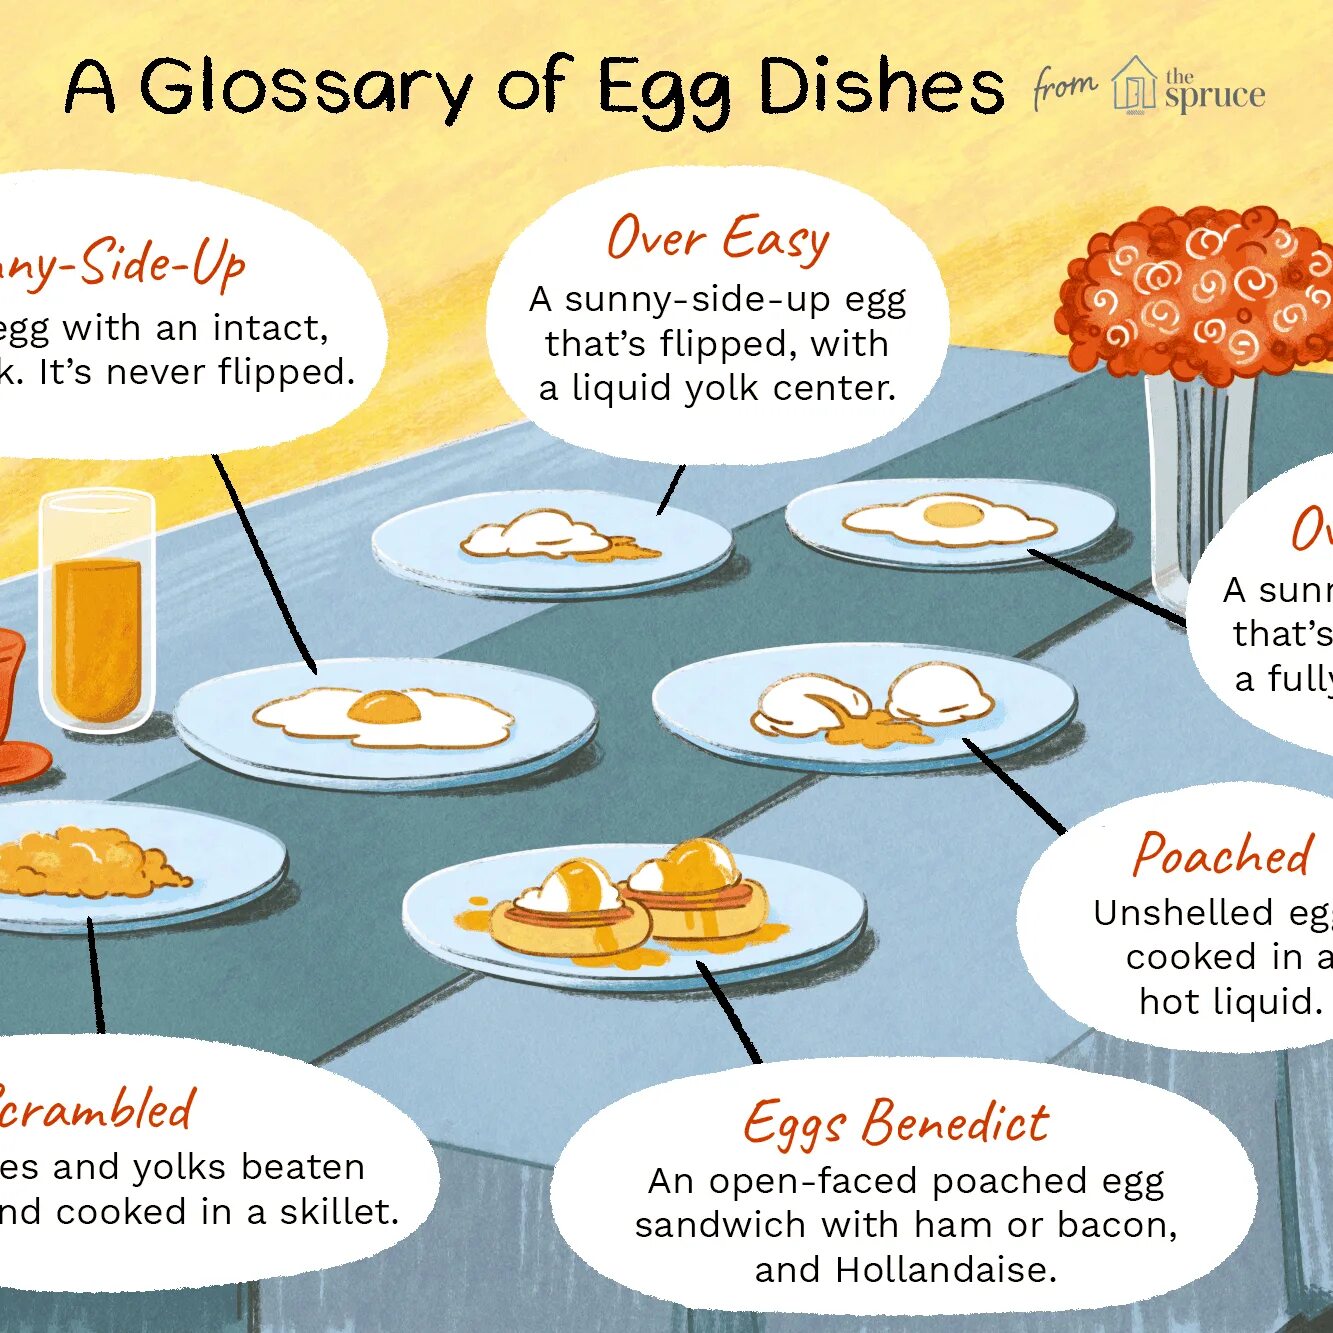 Types of Eggs Cooking. Types of cooked Eggs. Types of Fried Eggs. Kinds of cooked Eggs. Dish на английском языке